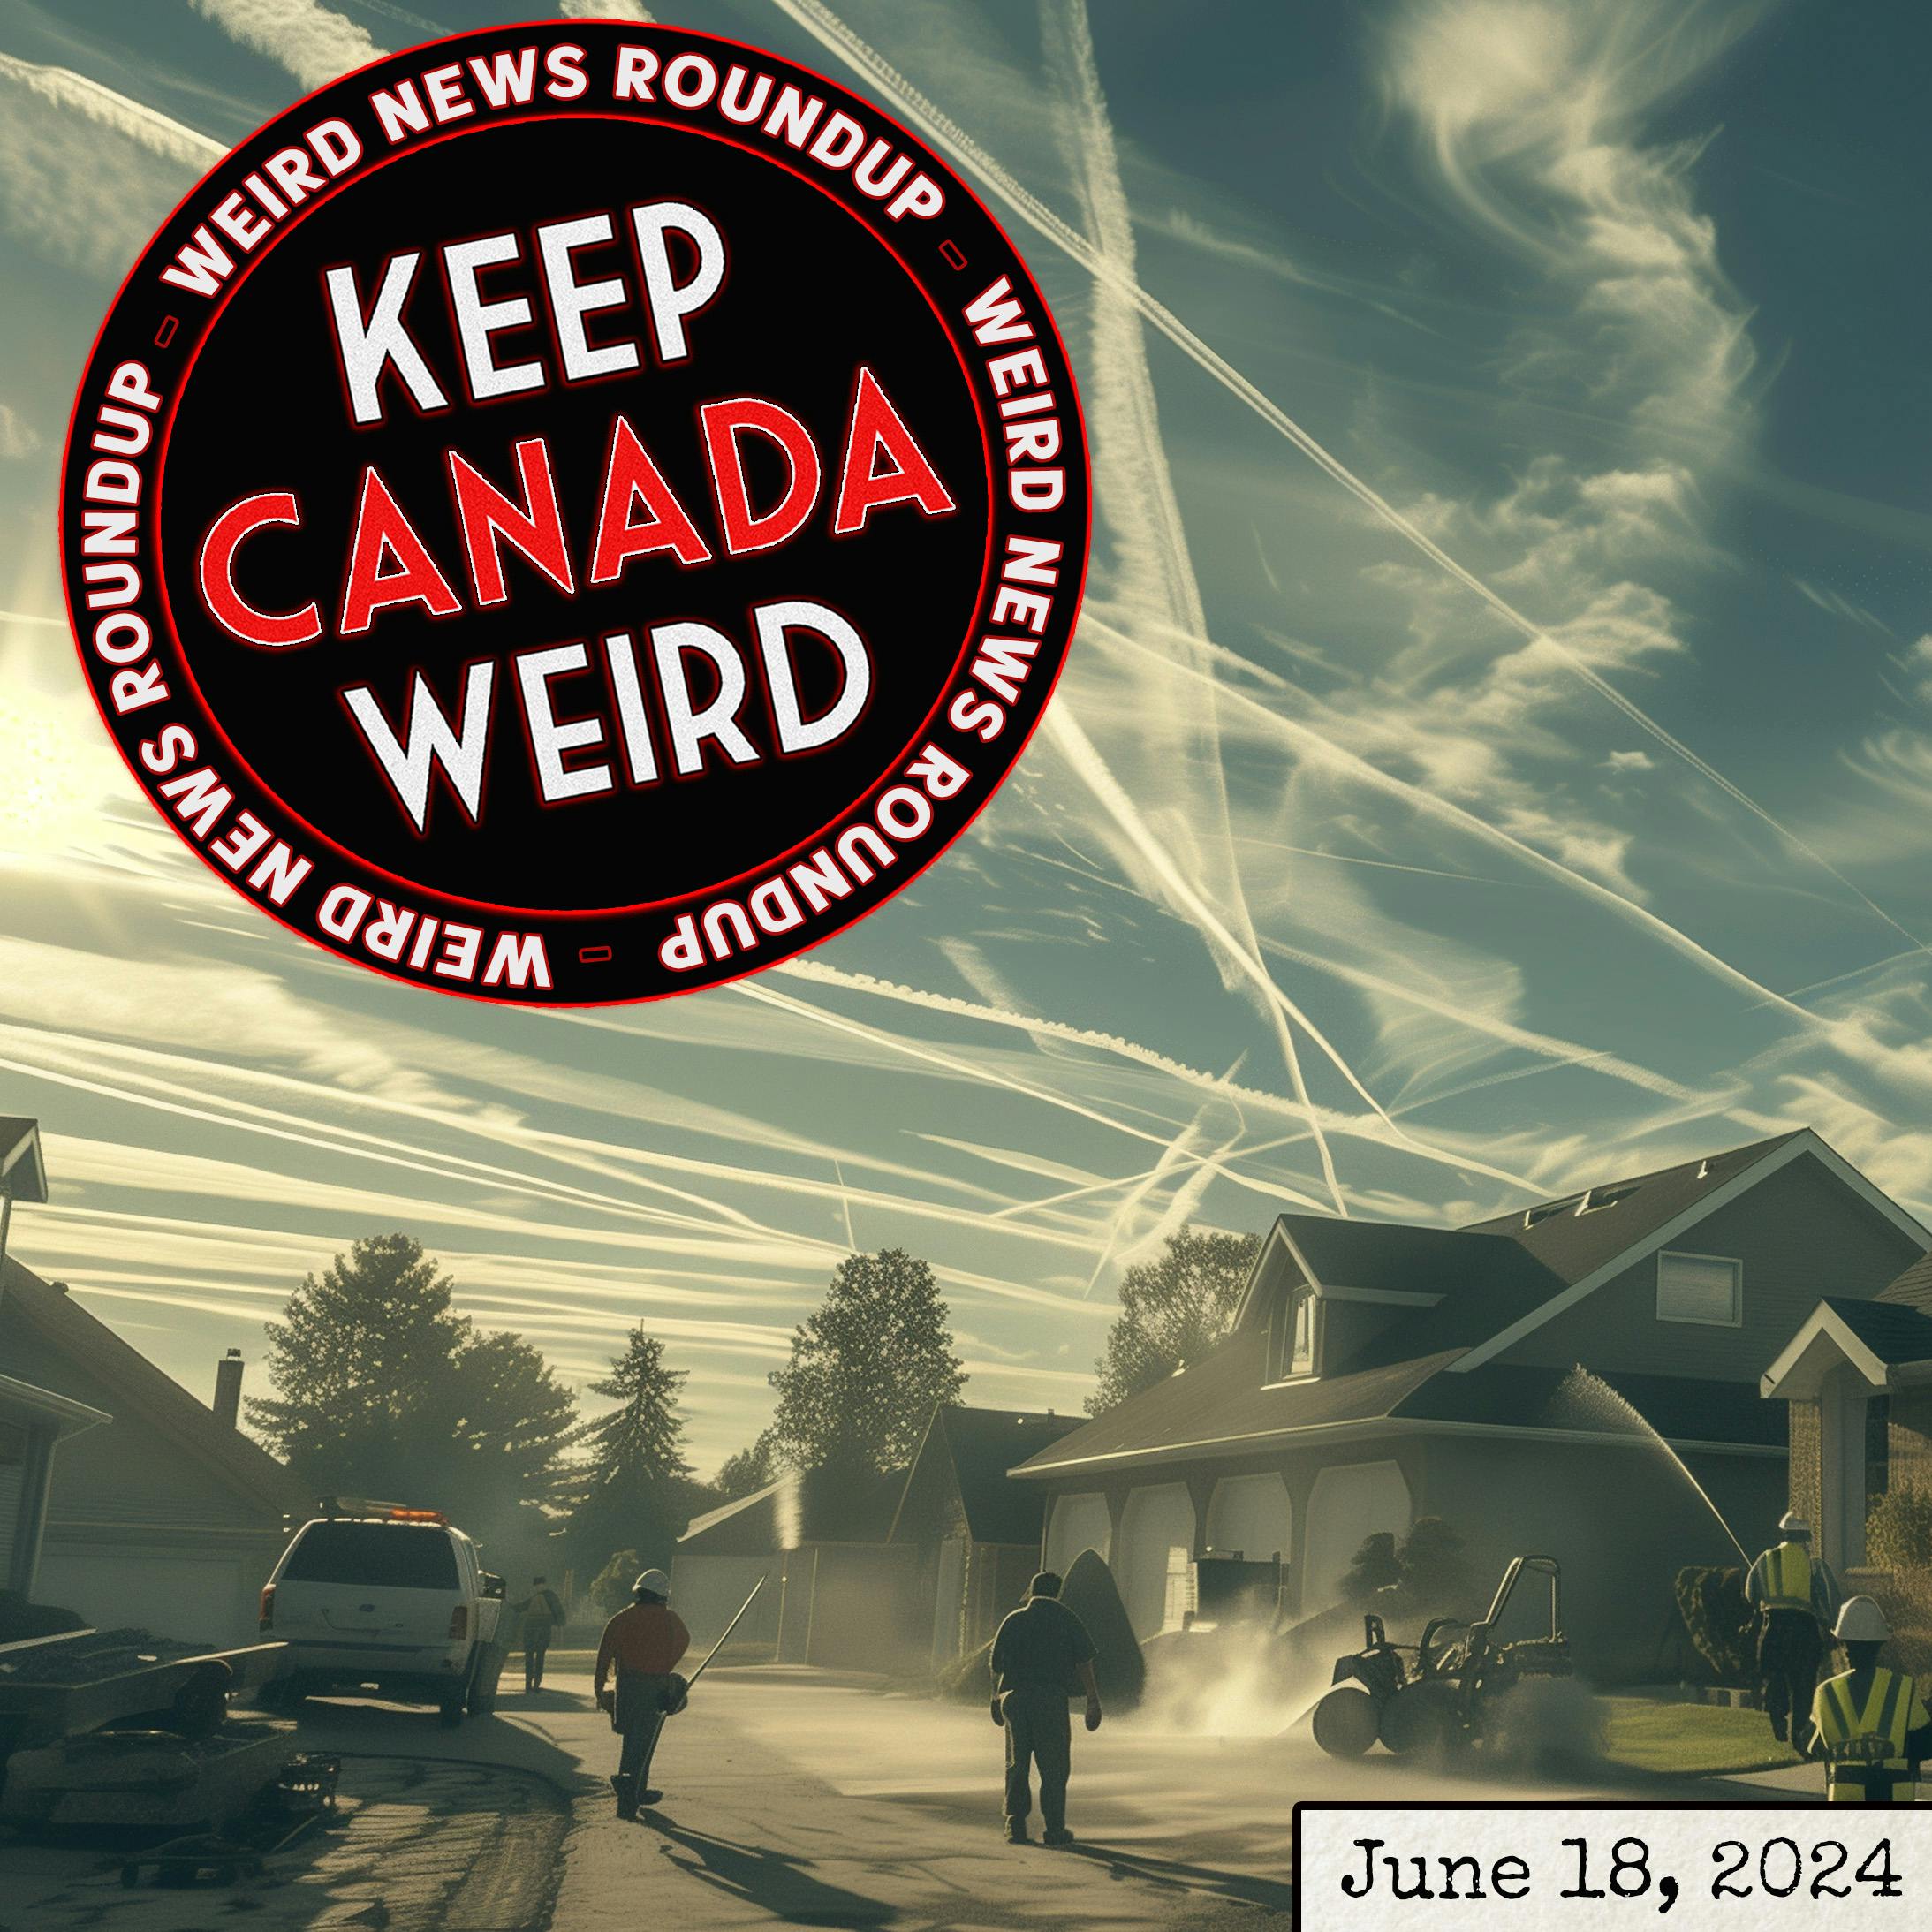 KEEP CANADA WEIRD - June 18, 2024 - Chemtrails, dogs, birds, and a paving scammer